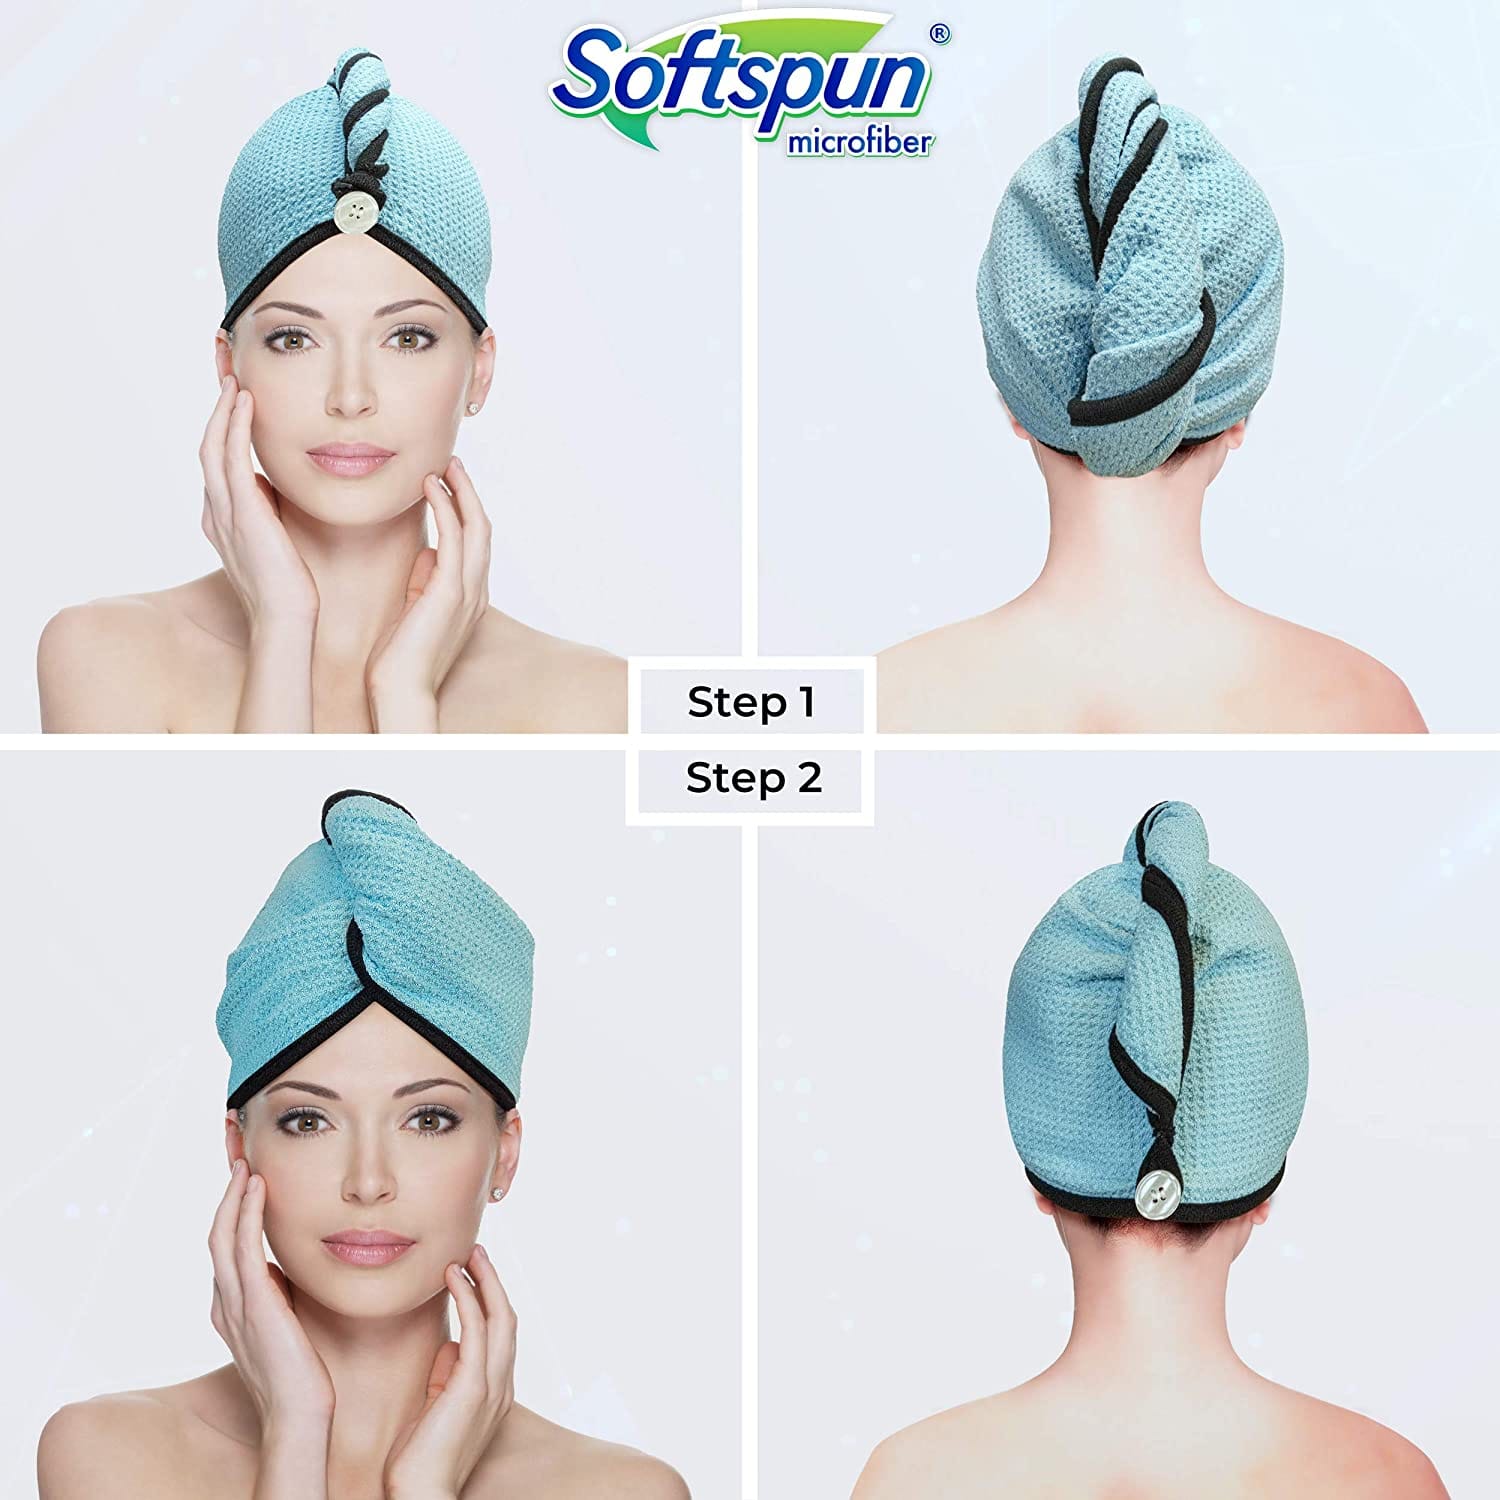 SOFTSPUN Microfiber Hair Cap Silk Banded Edge 1, Pcs -70X25cm, Super Absorbent Quick Dry Hair Turban for Drying All kinds of Hair - Straight or Curly short or Long Thin or Thick Hair.